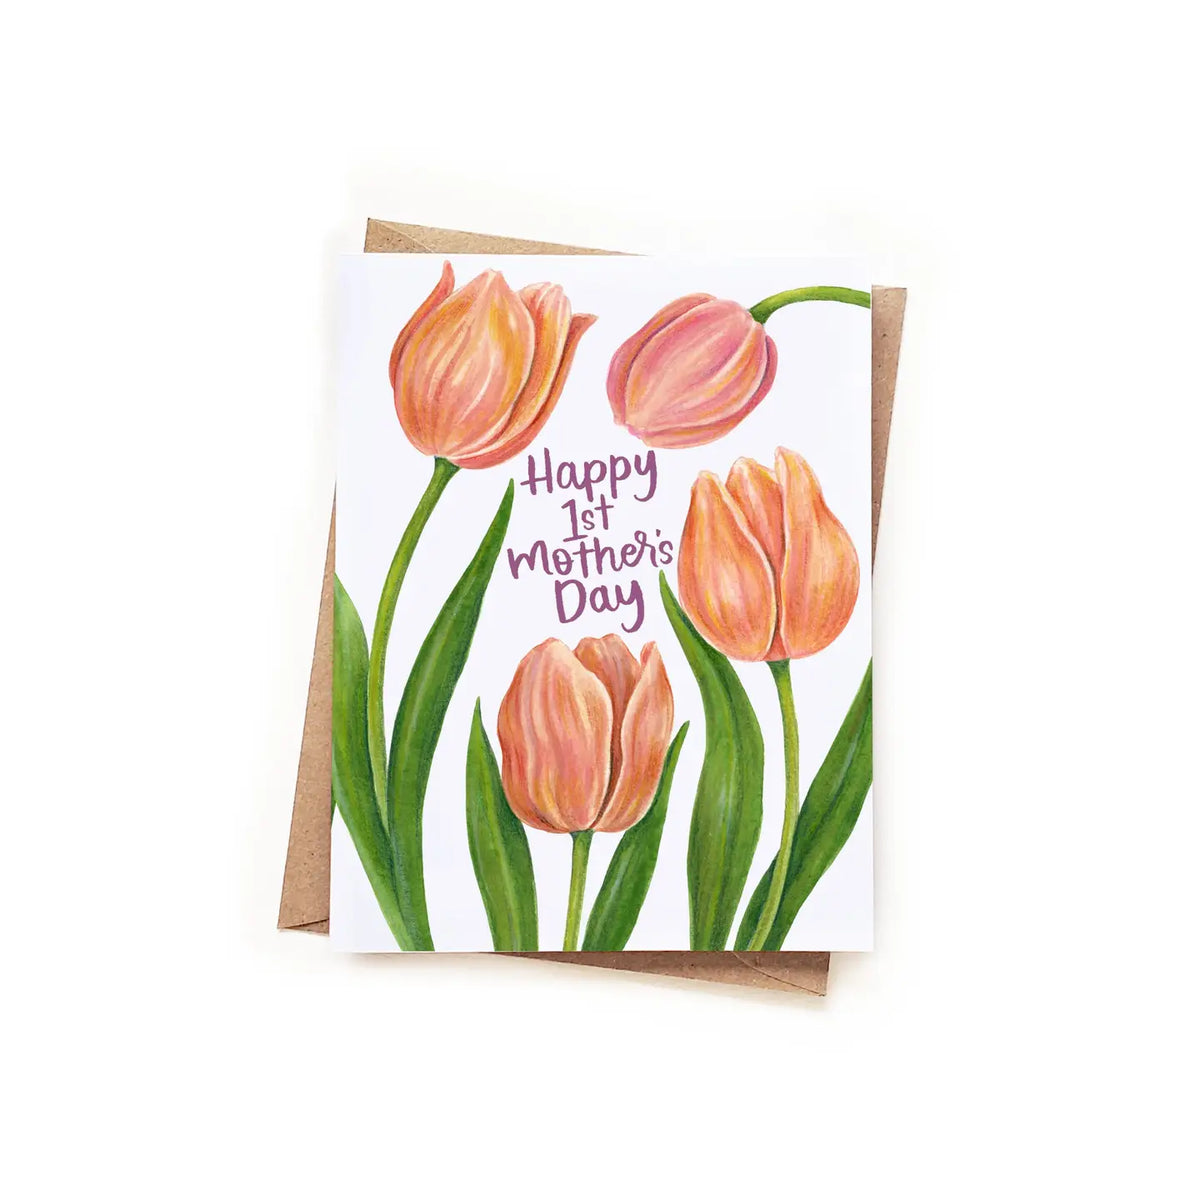 Happy 1st Mother's Day Tulips Card - JoeyRae